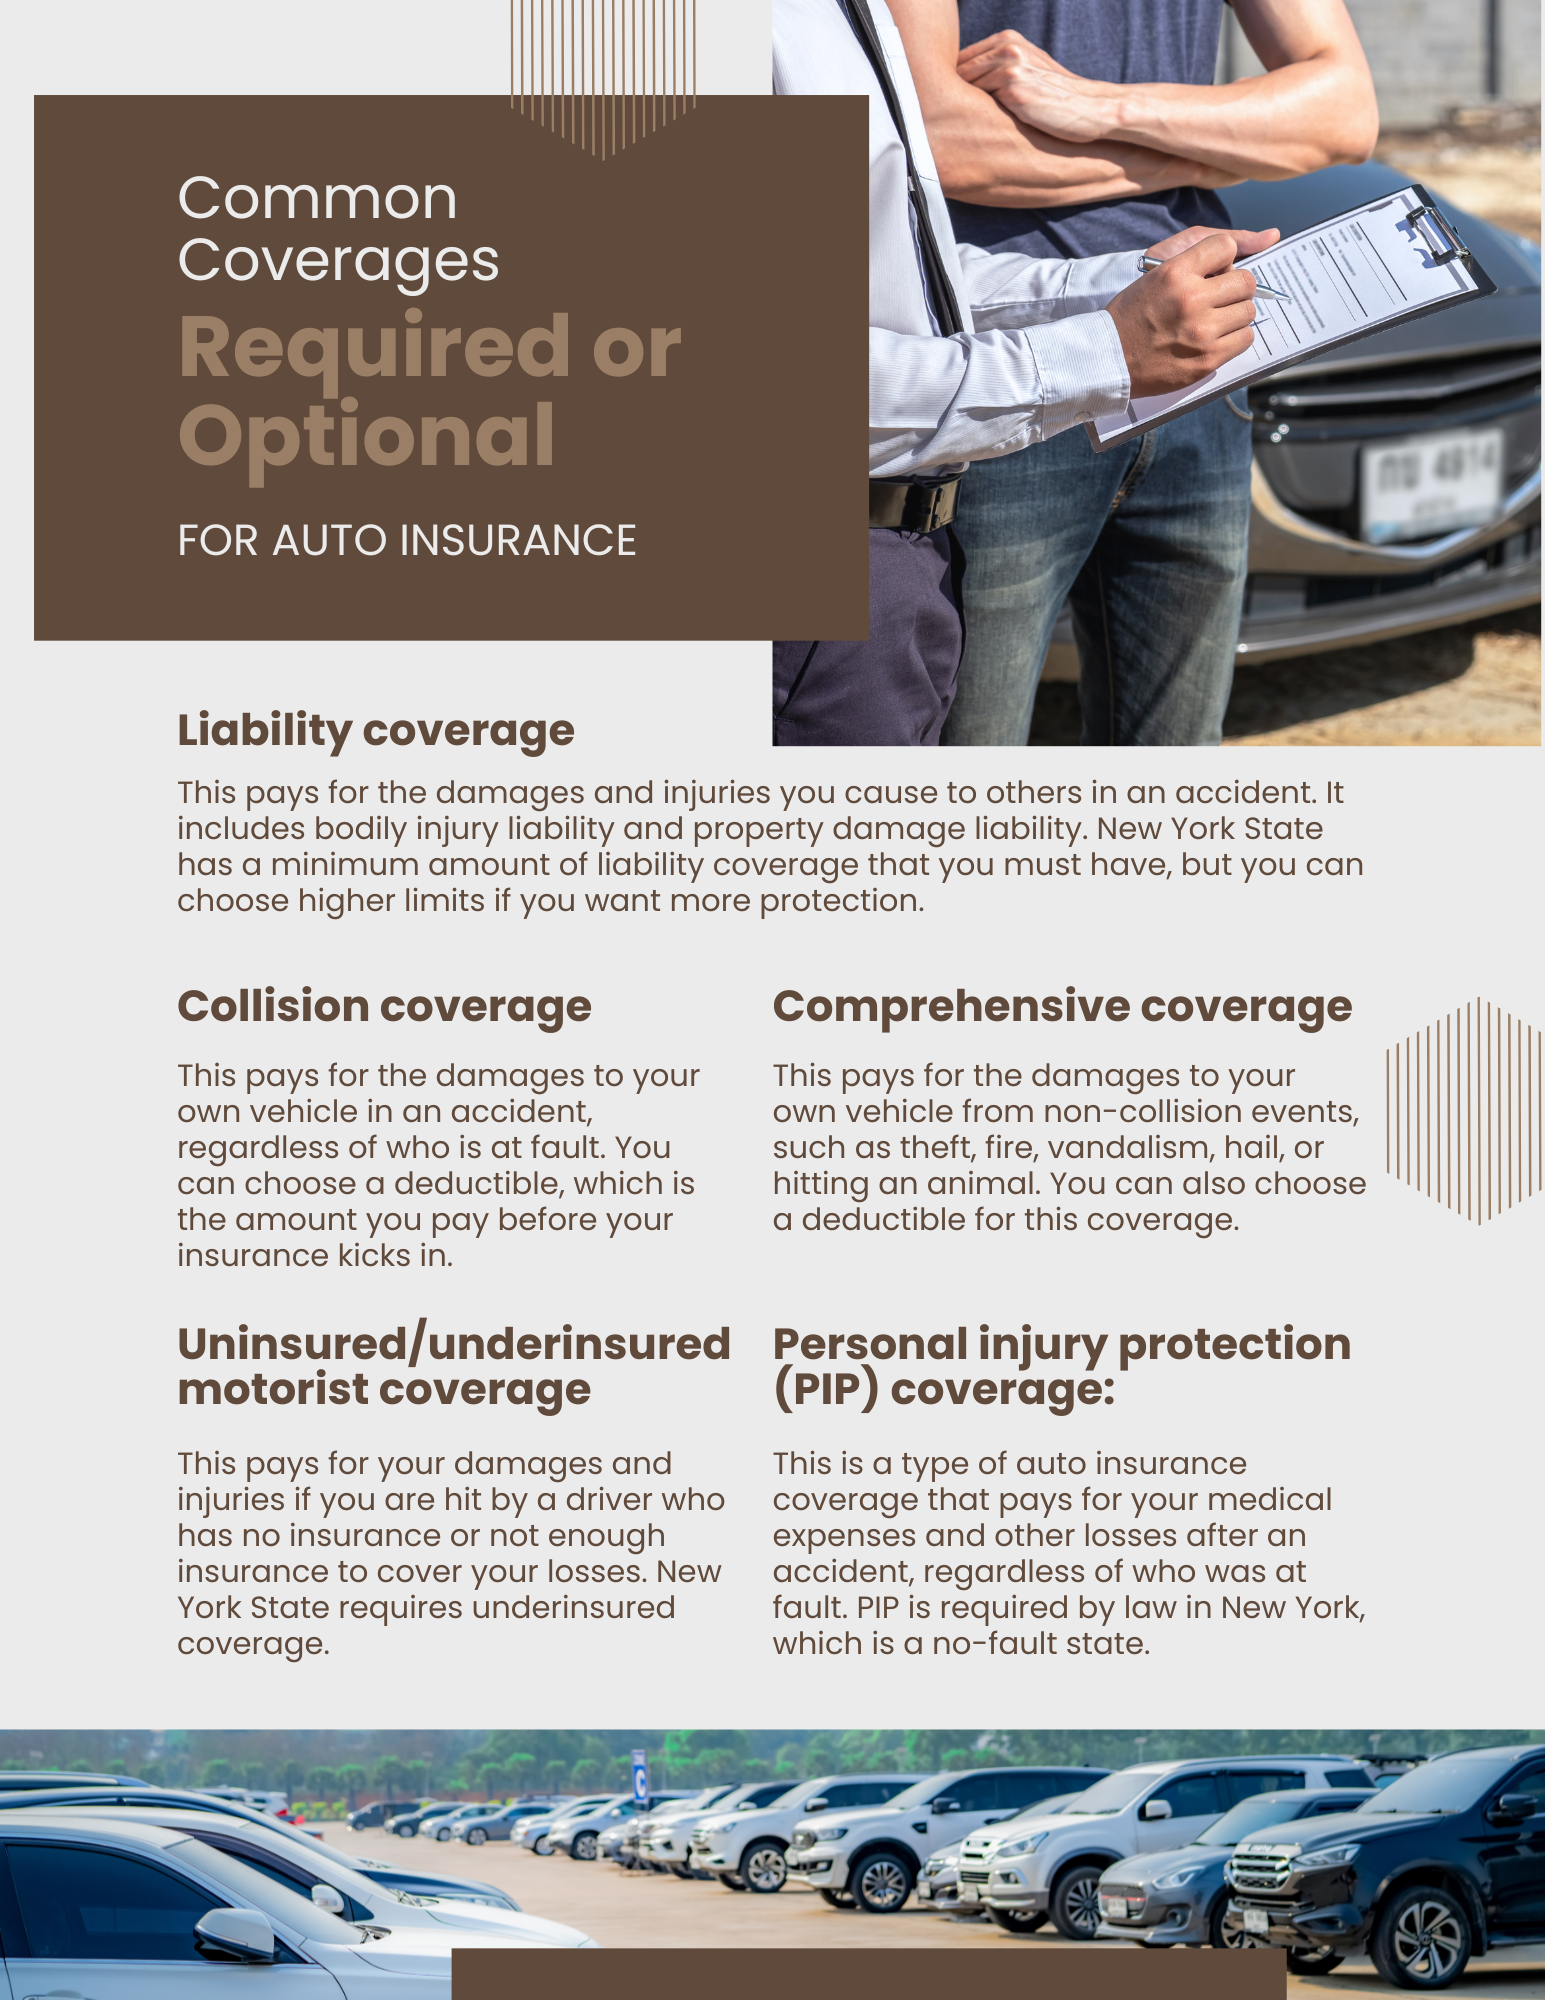 Common coverages, required or optional, for New York auto insurance